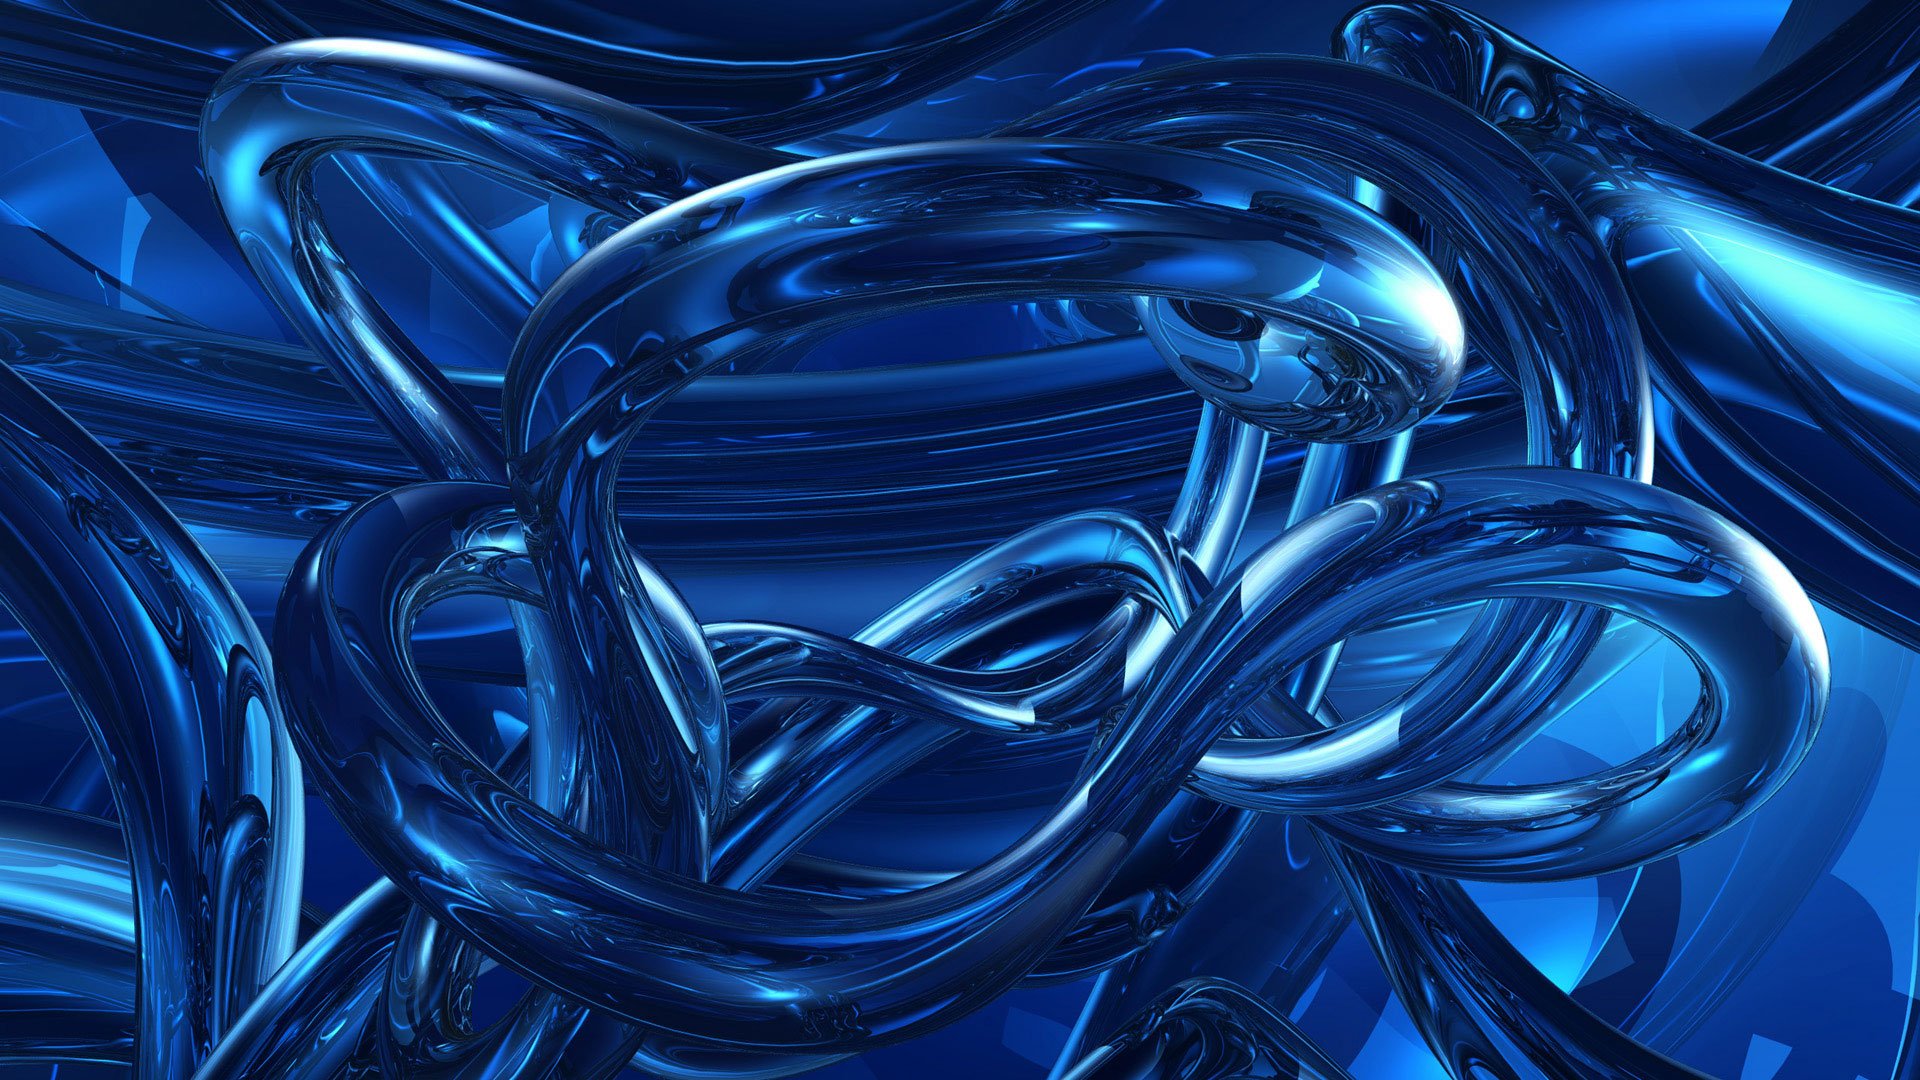 Dark Blue Abstracts Wallpapers HD Wallpapers